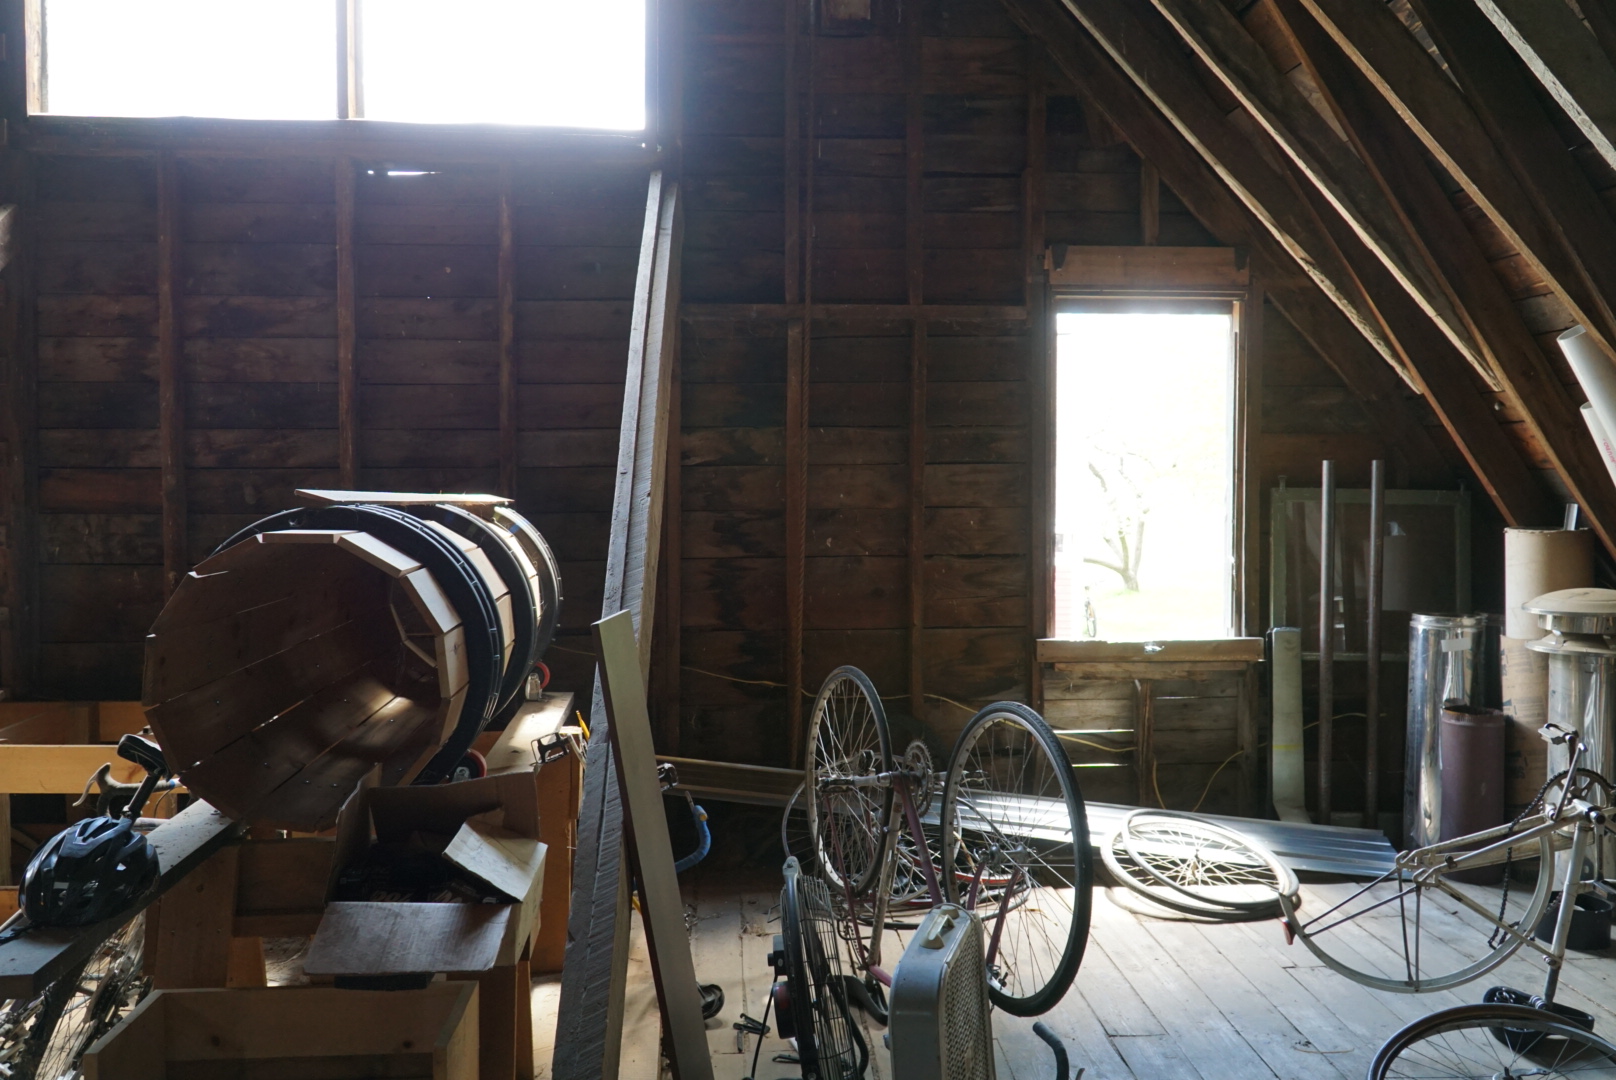 An image of a bicycle in an attic.